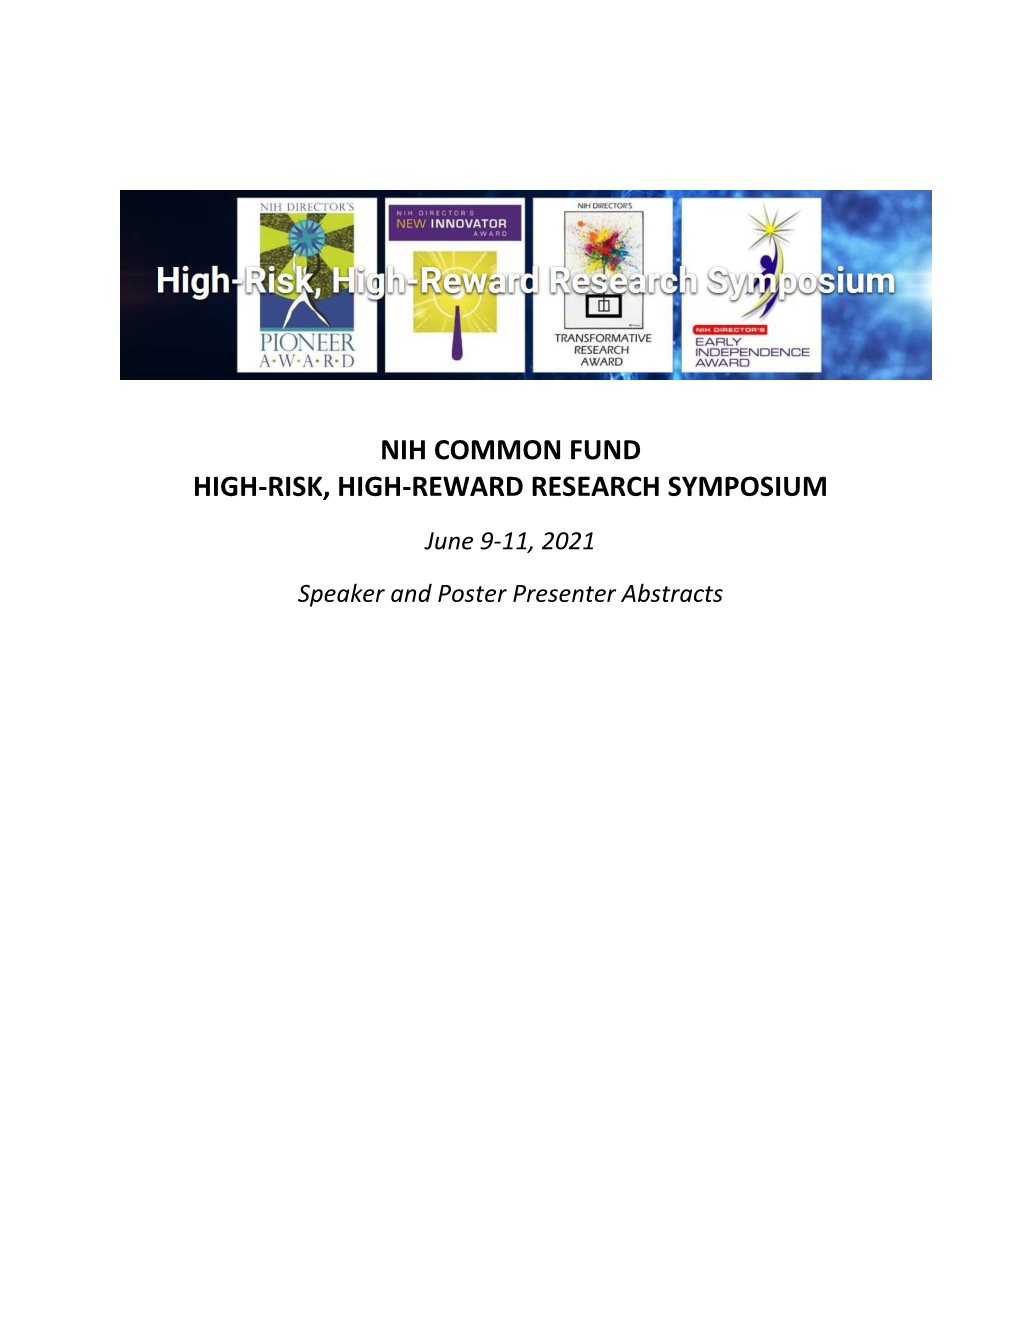 NIH High-Risk, High-Reward Research Symposium 2021 Abstracts